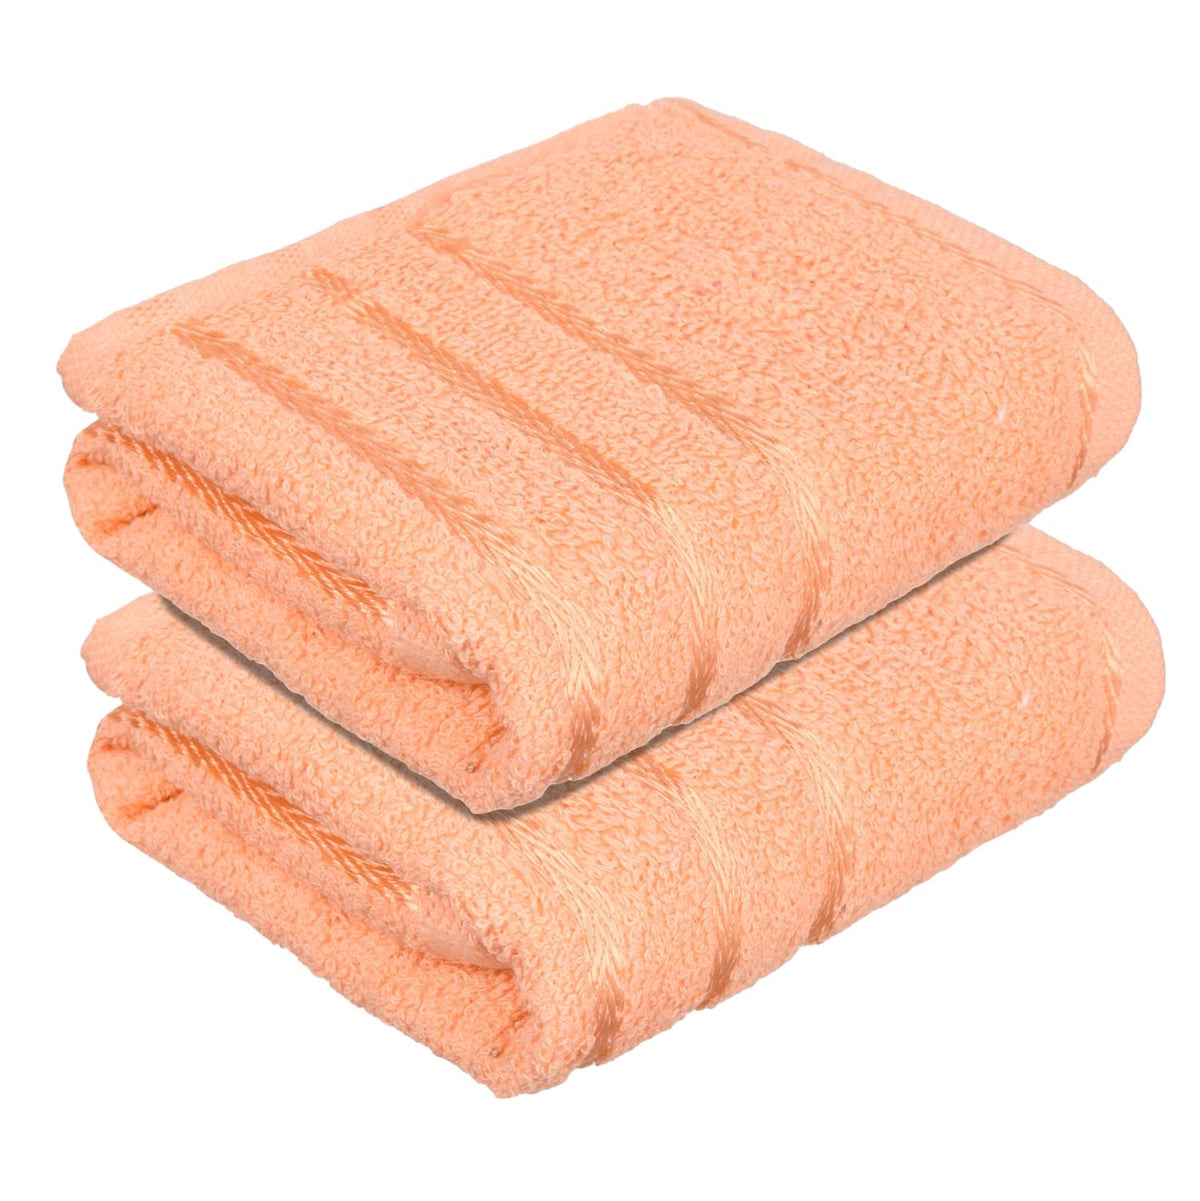 Kuber industries Face Towel | Towels for Facewash | Towels for Gym | Facewash for Travel | Towels for Daily use | Workout Hand Towel | Lining Design | 14x21 Inch | Pack of 2 | Peach